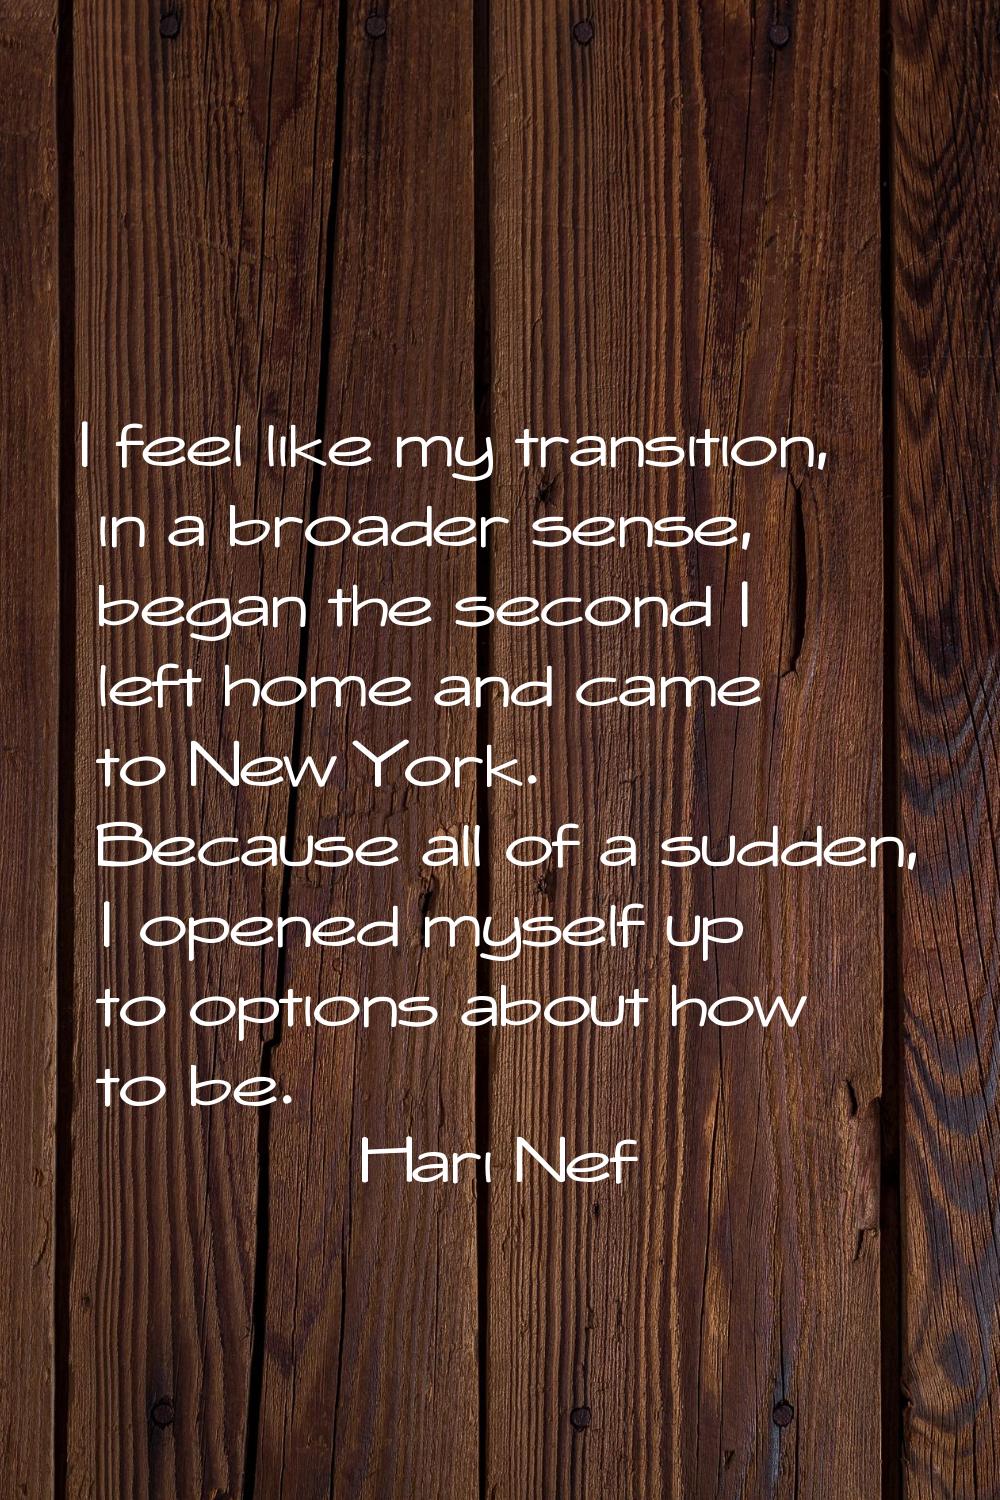 I feel like my transition, in a broader sense, began the second I left home and came to New York. B